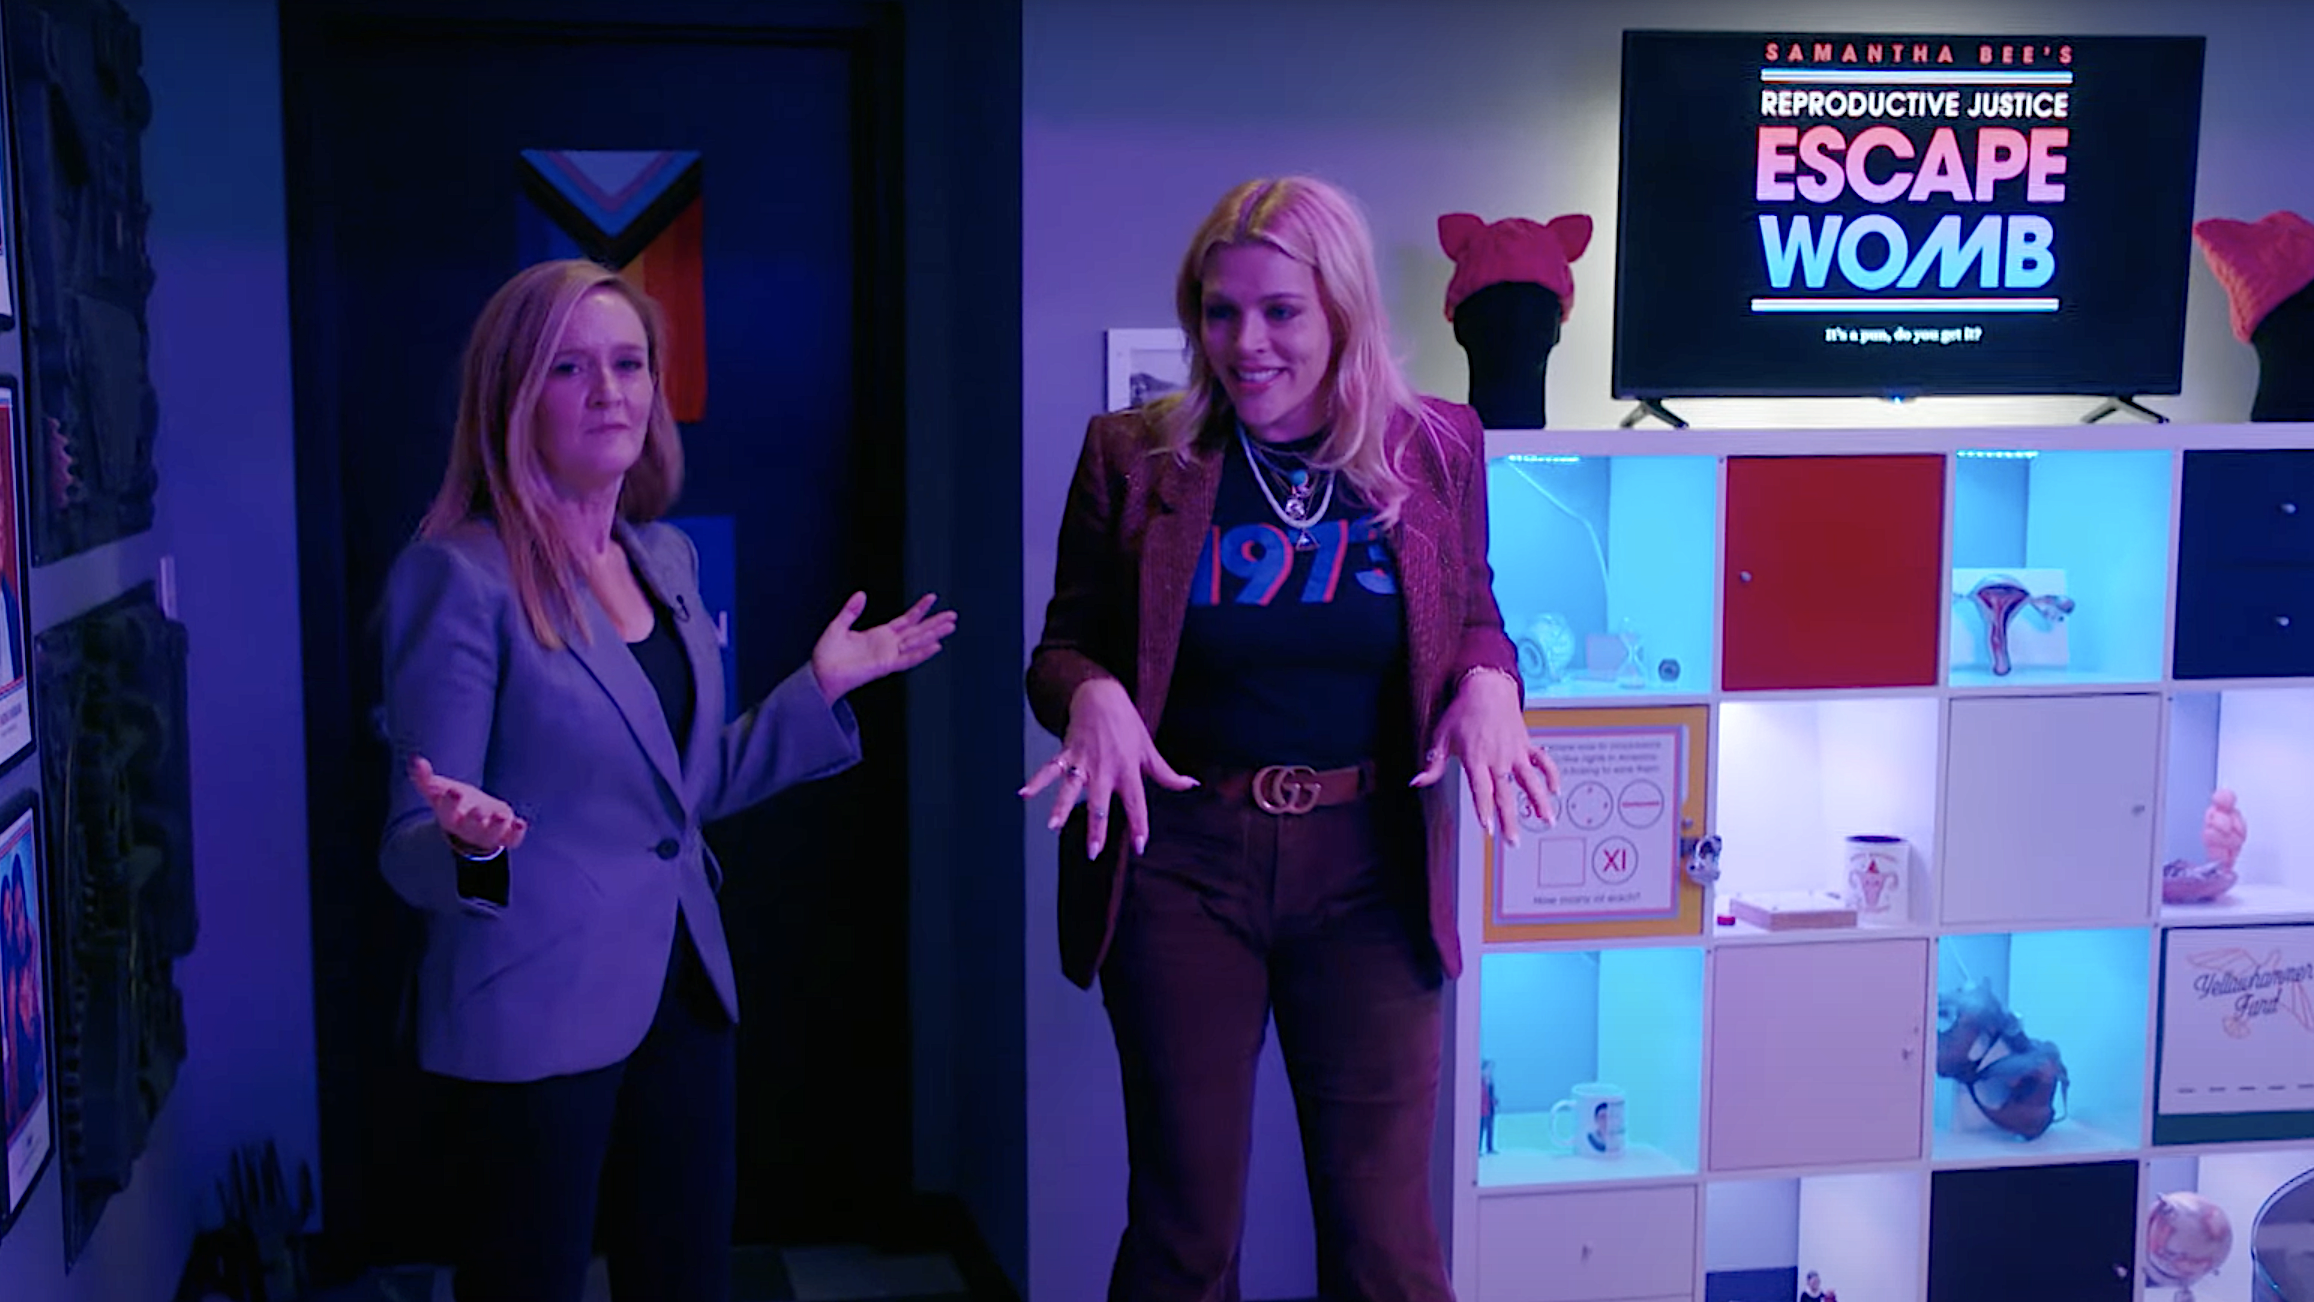 Busy Philipps carries Sam Bee through Full Frontal‘s abortion-themed escape room